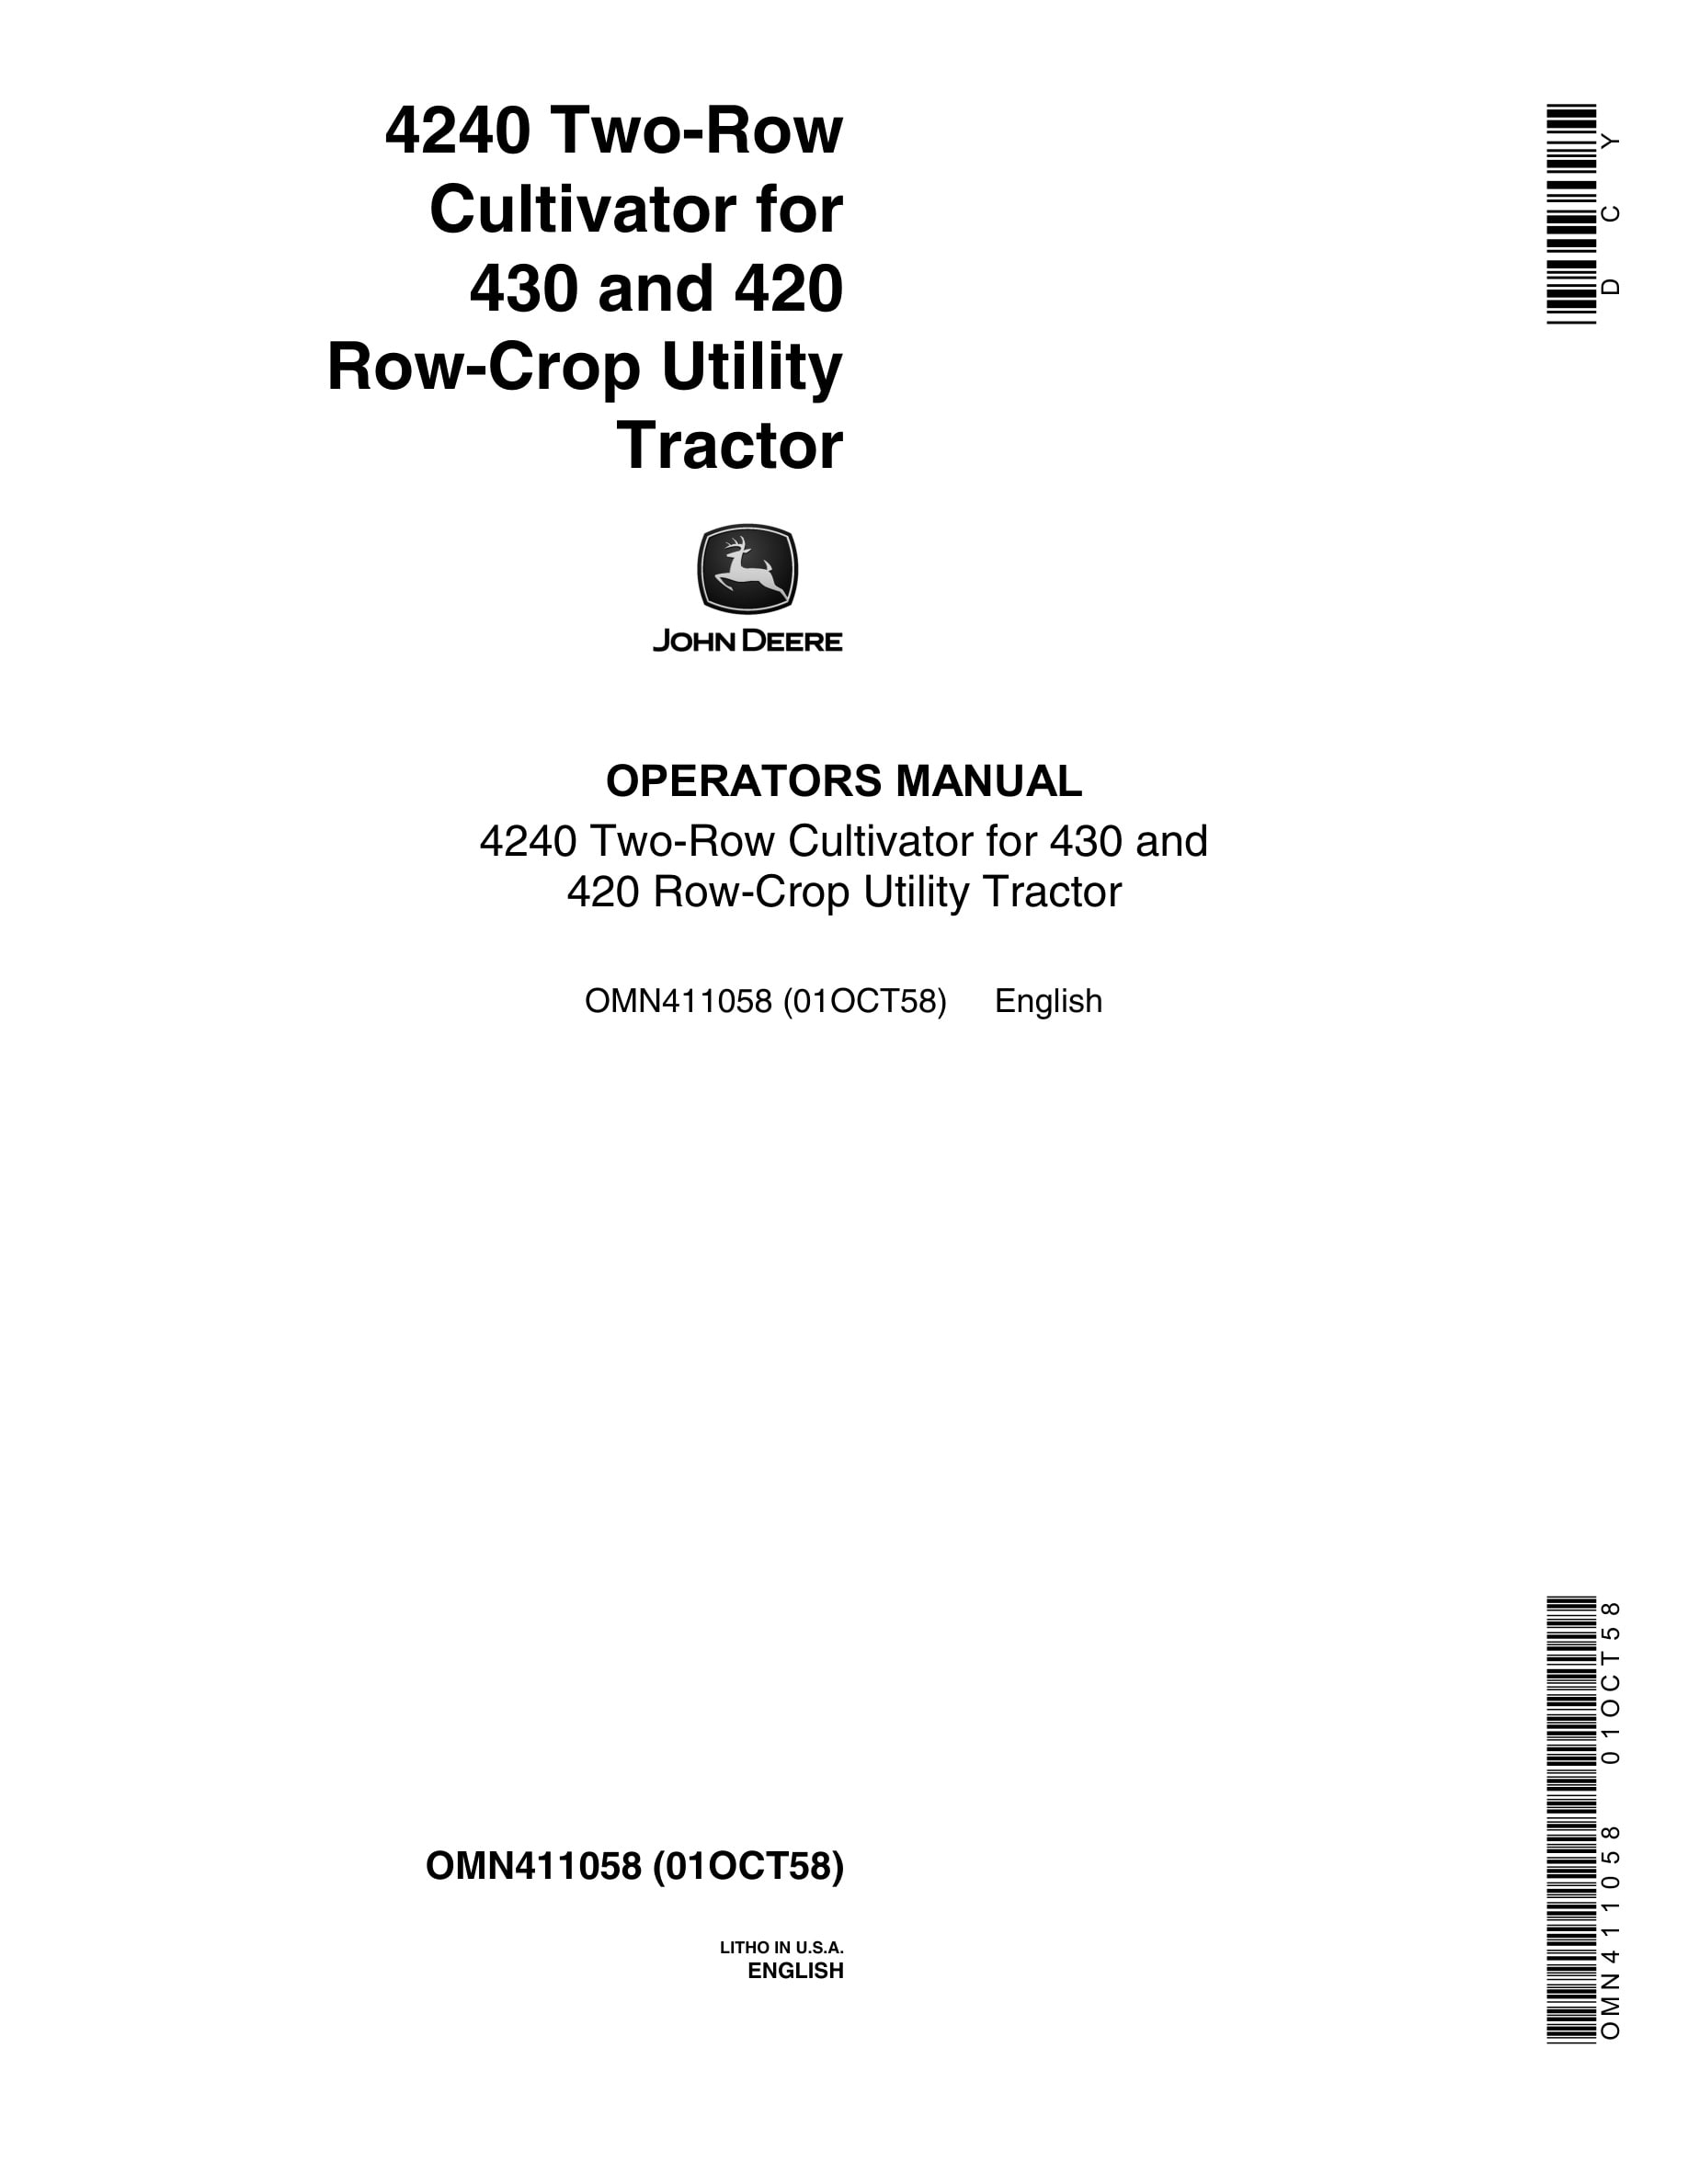 John Deere 4240 Two-Row CULTIVATOR for 430 and 420 Row Operator Manual OMN411058-1